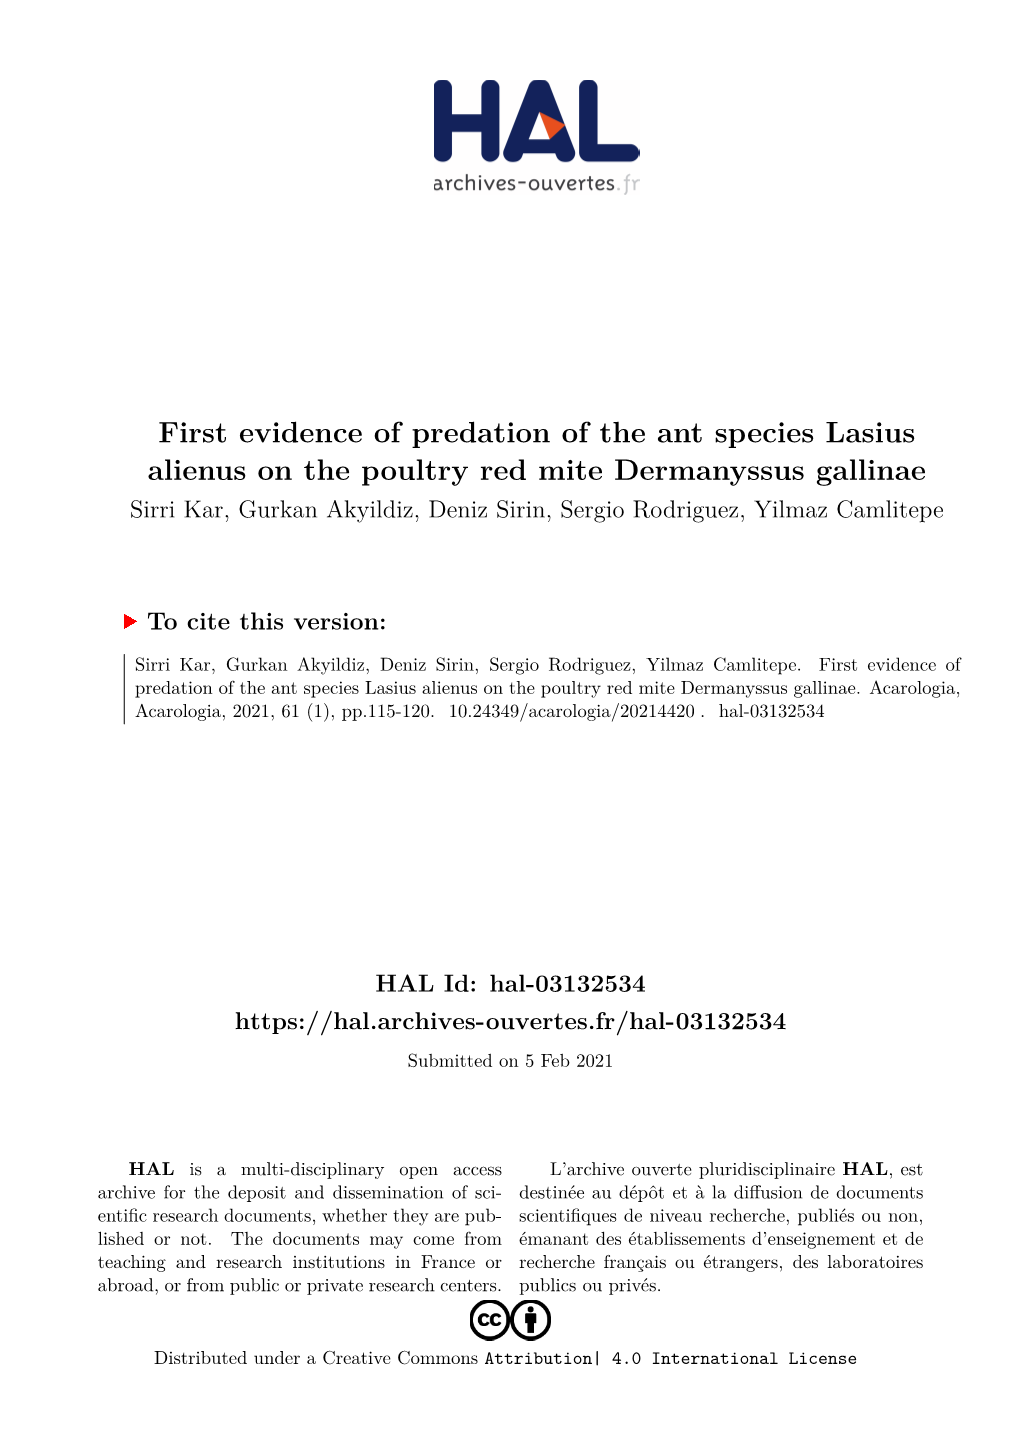 First Evidence of Predation of the Ant Species Lasius Alienus on The